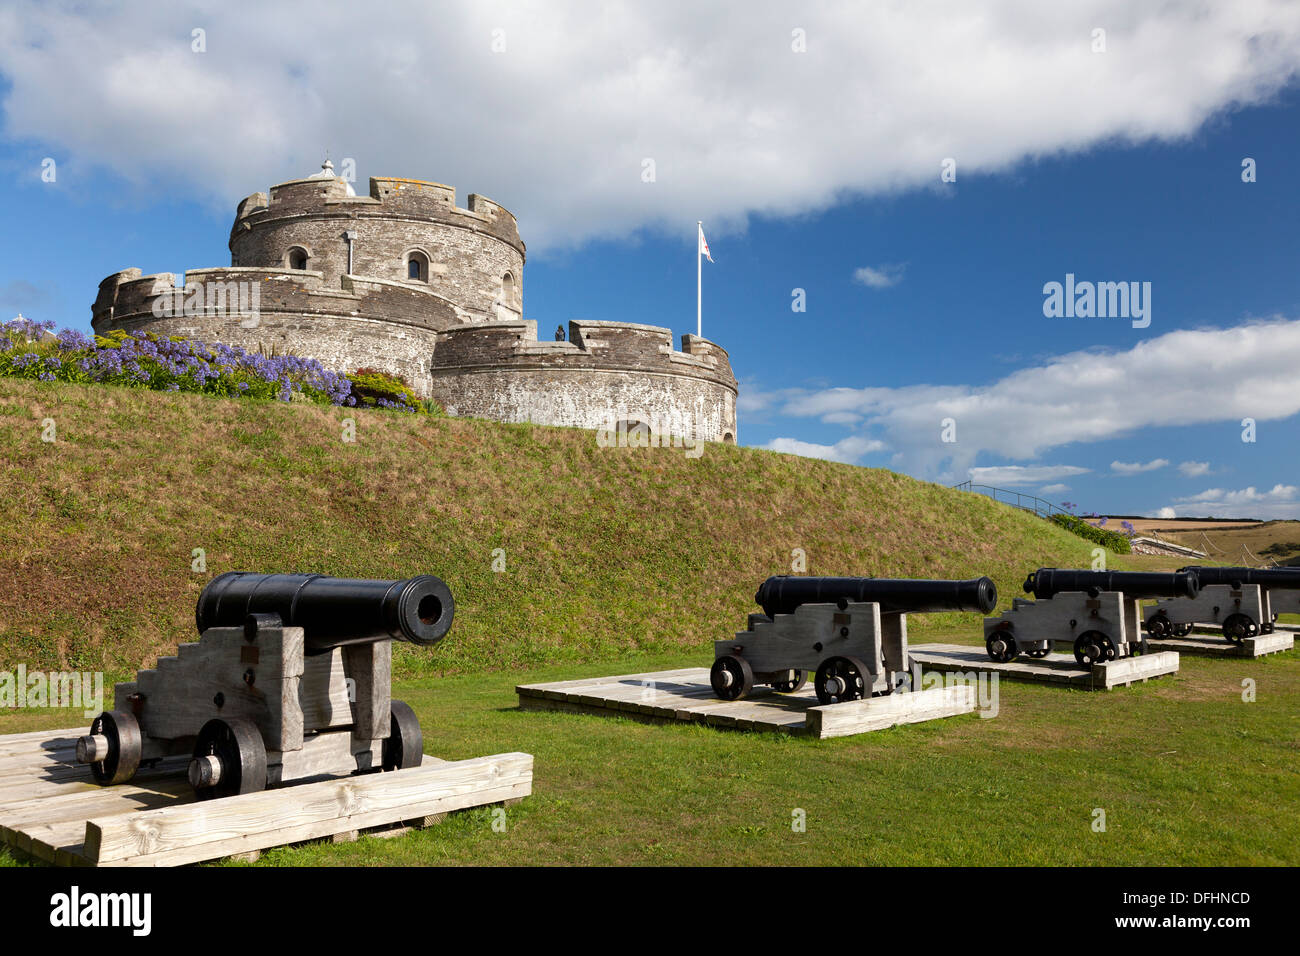 St Mawes Castle with cannons in the grounds, Cornwall Stock Photo